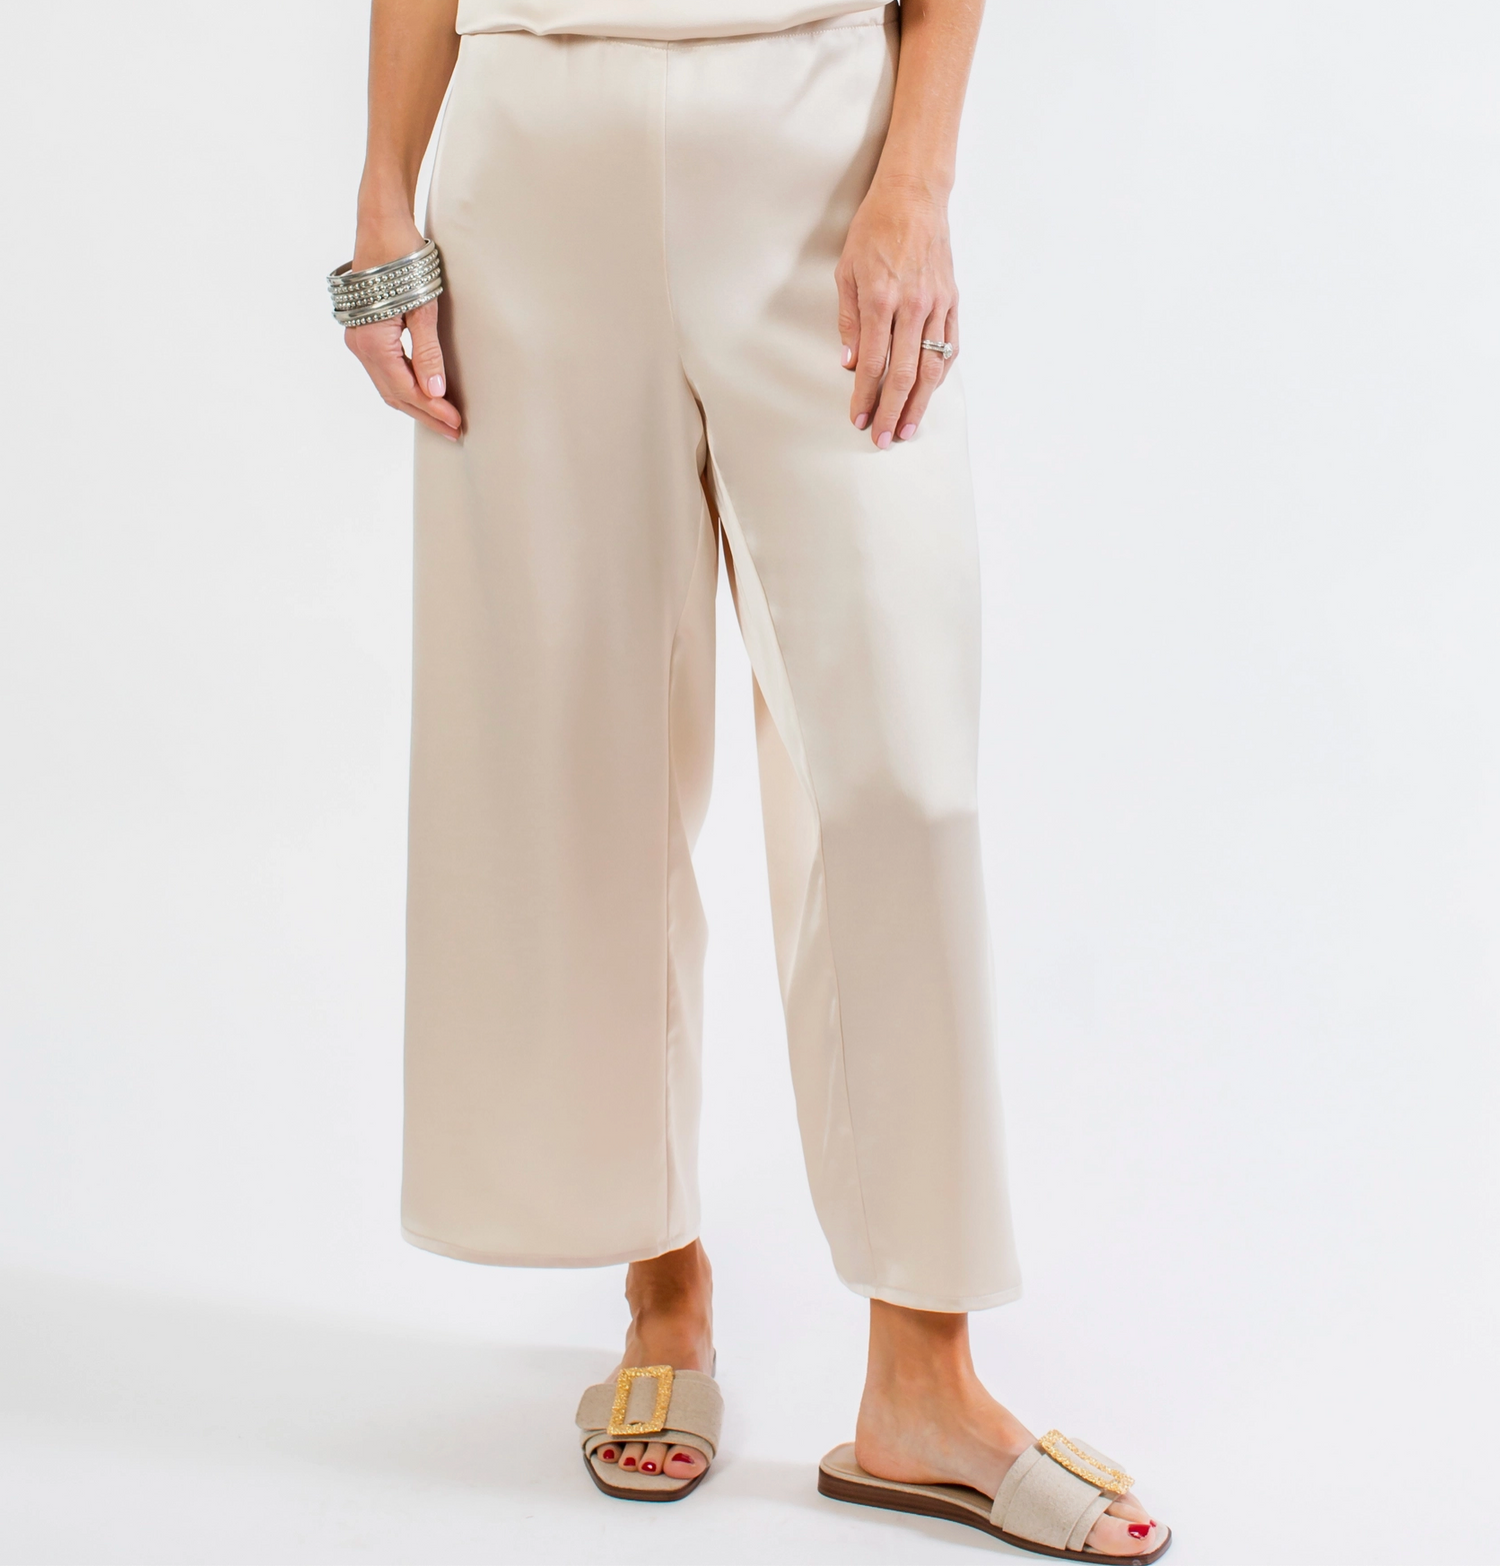 luxurious and lavishly soft to the touch, perfect for any occasion. Crafted from a washable silken fabric, this pant promises unbeatable comfort and an elegant, refined look. Show off your stylish side in this timeless wardrobe staple.